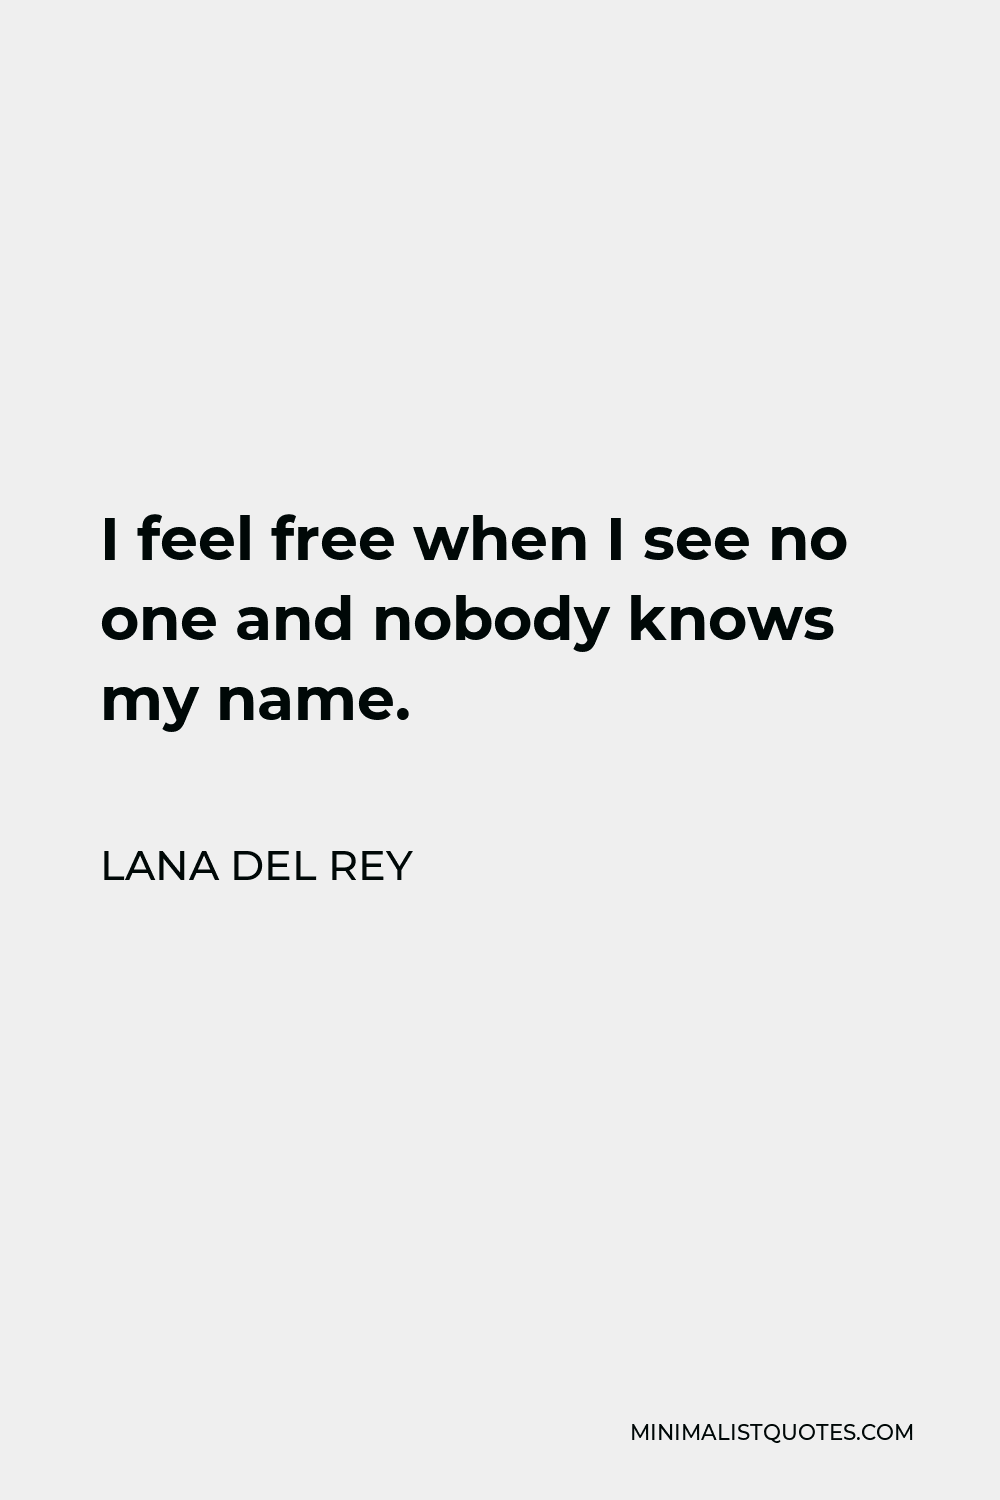 Lana Del Rey Quote - I feel free when I see no one and nobody knows my name.